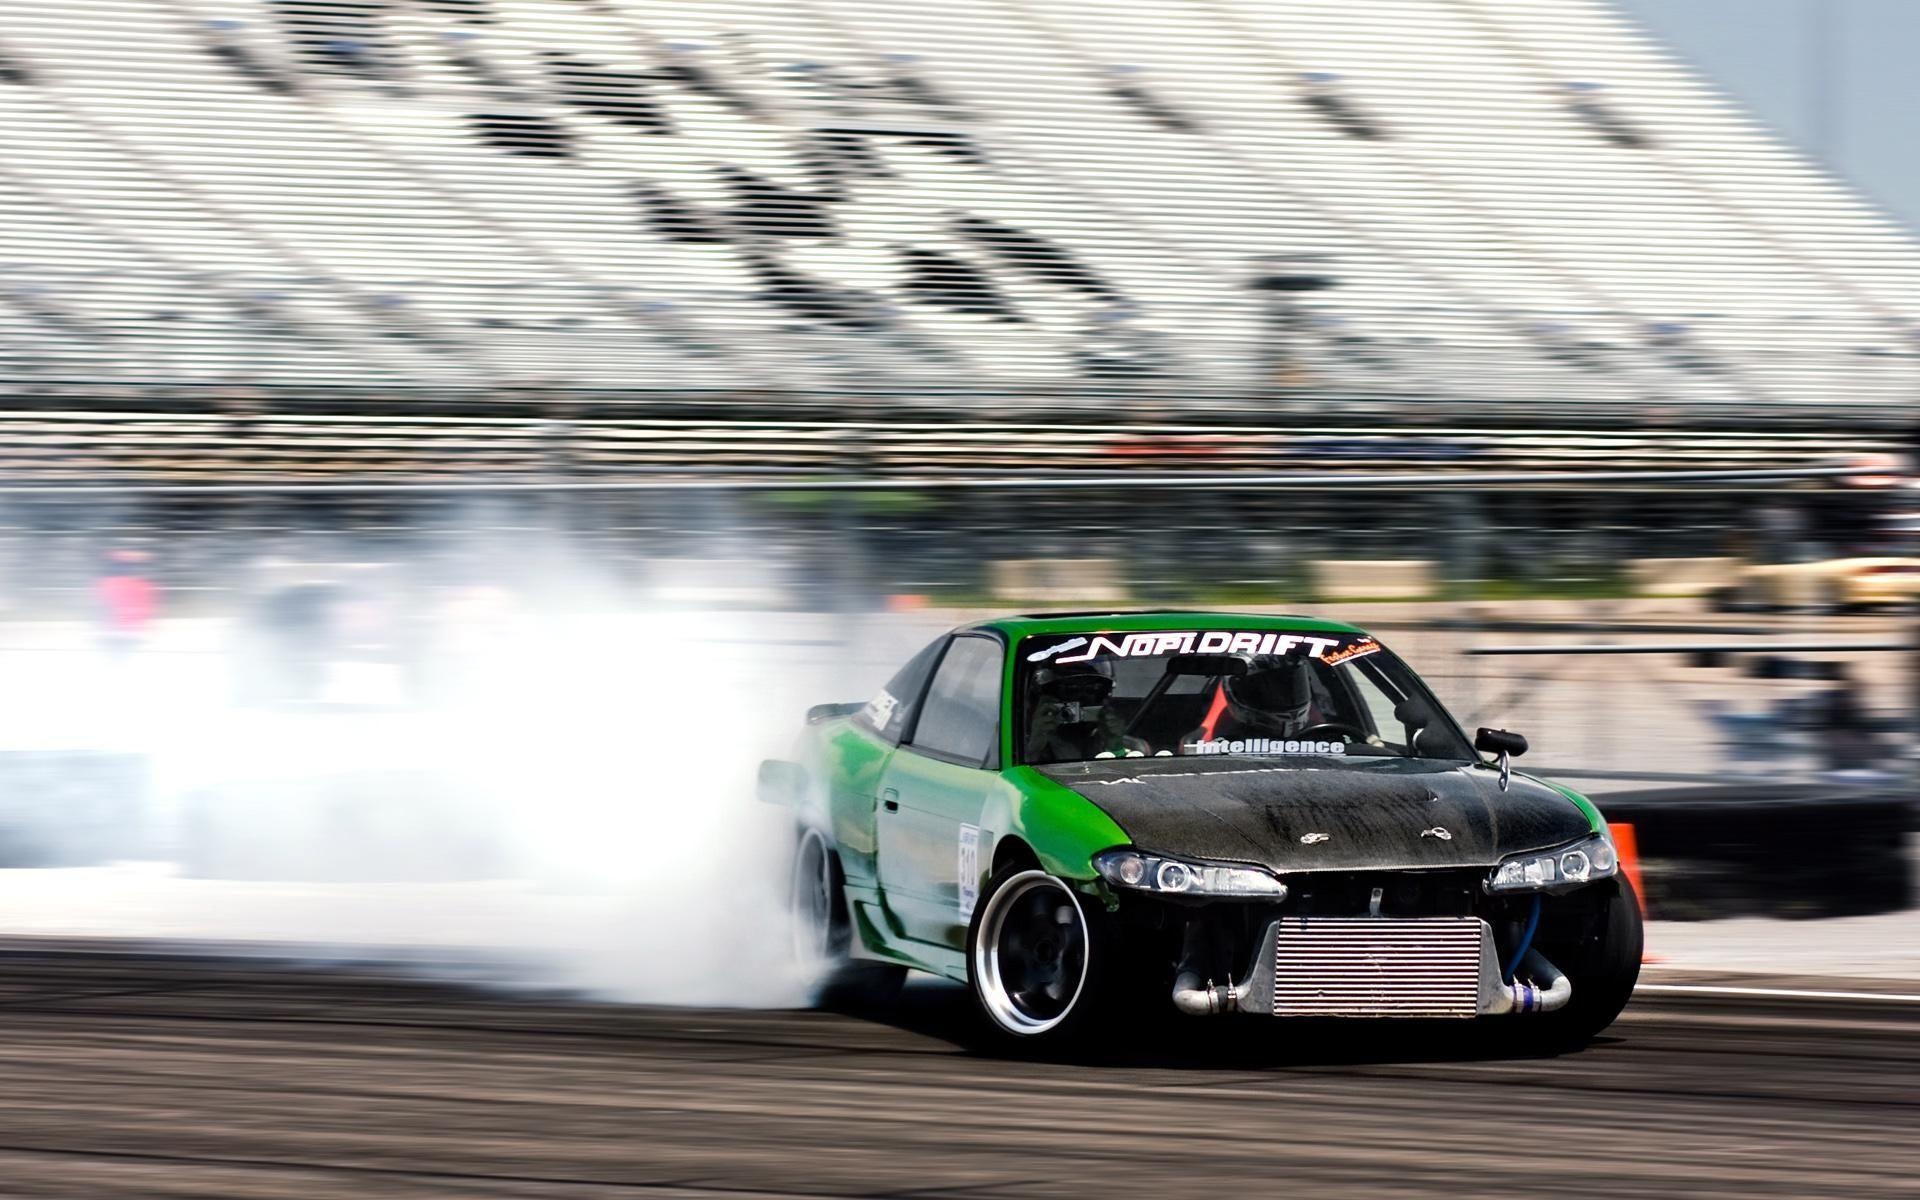 Drifting: Nopi Drift competitive event, Smoking tires on the racing track. 1920x1200 HD Wallpaper.